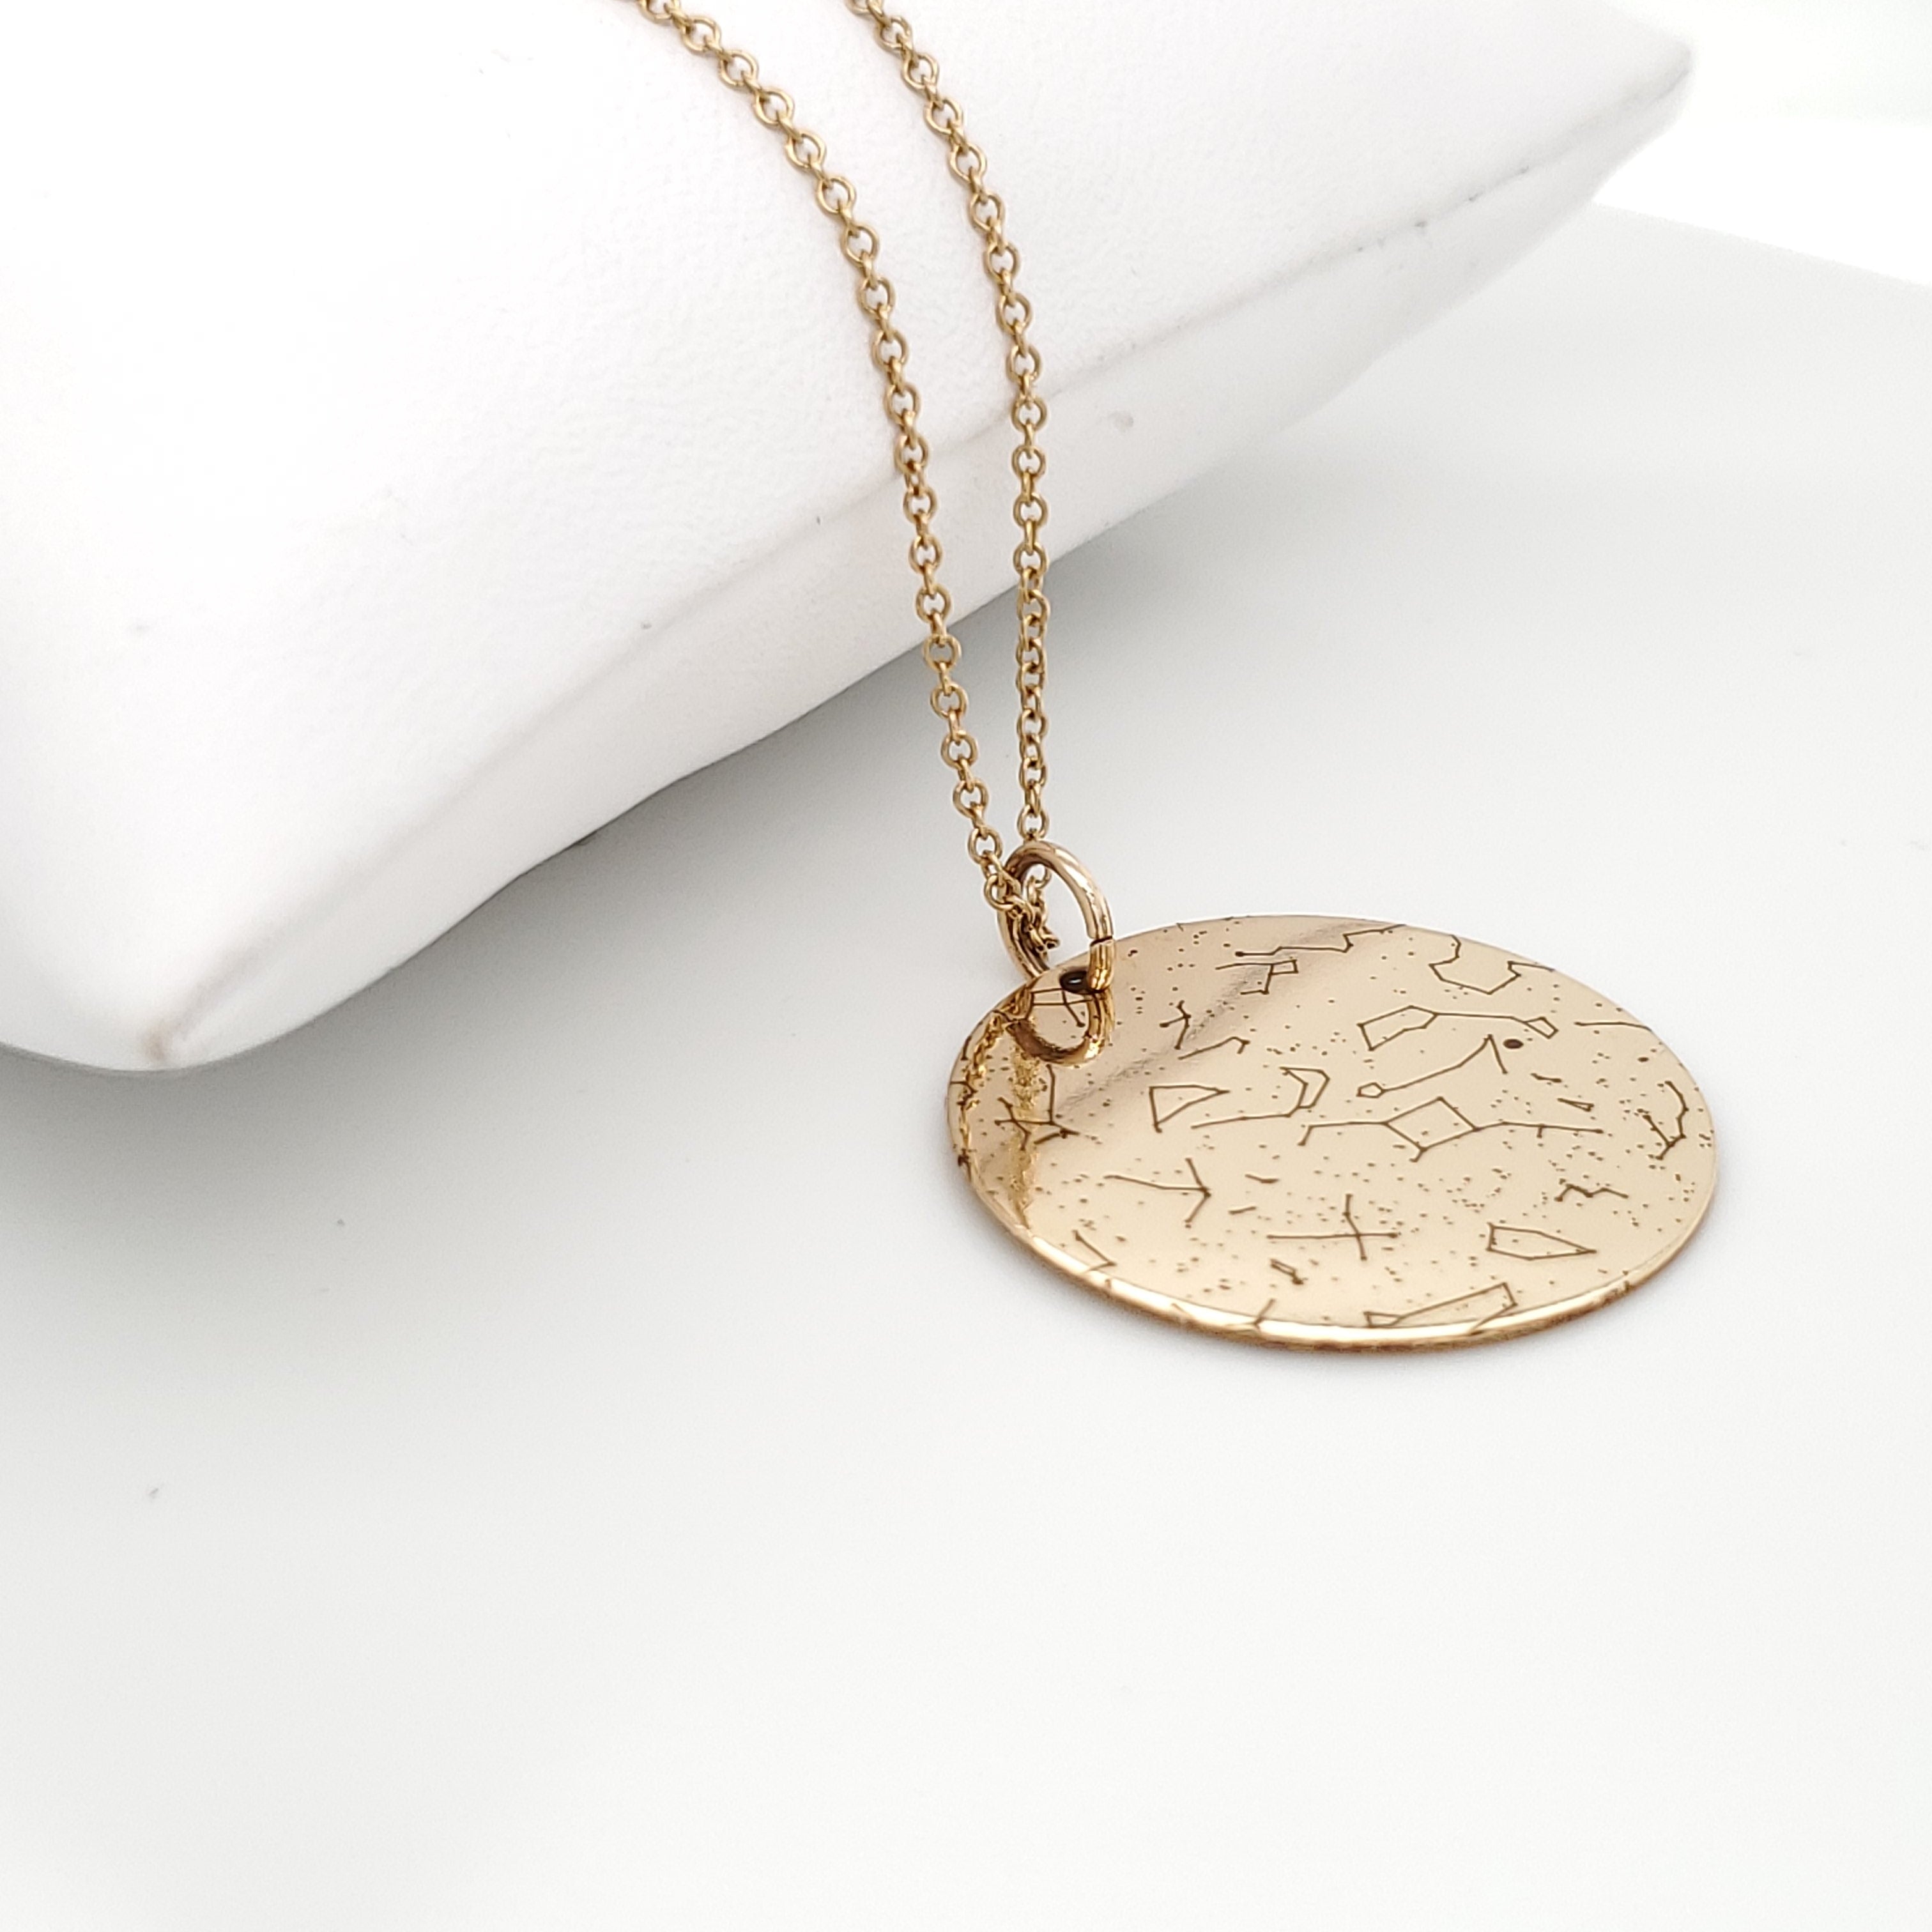 Custom Star Map Necklace in Gold-Filled by Lat & Lo